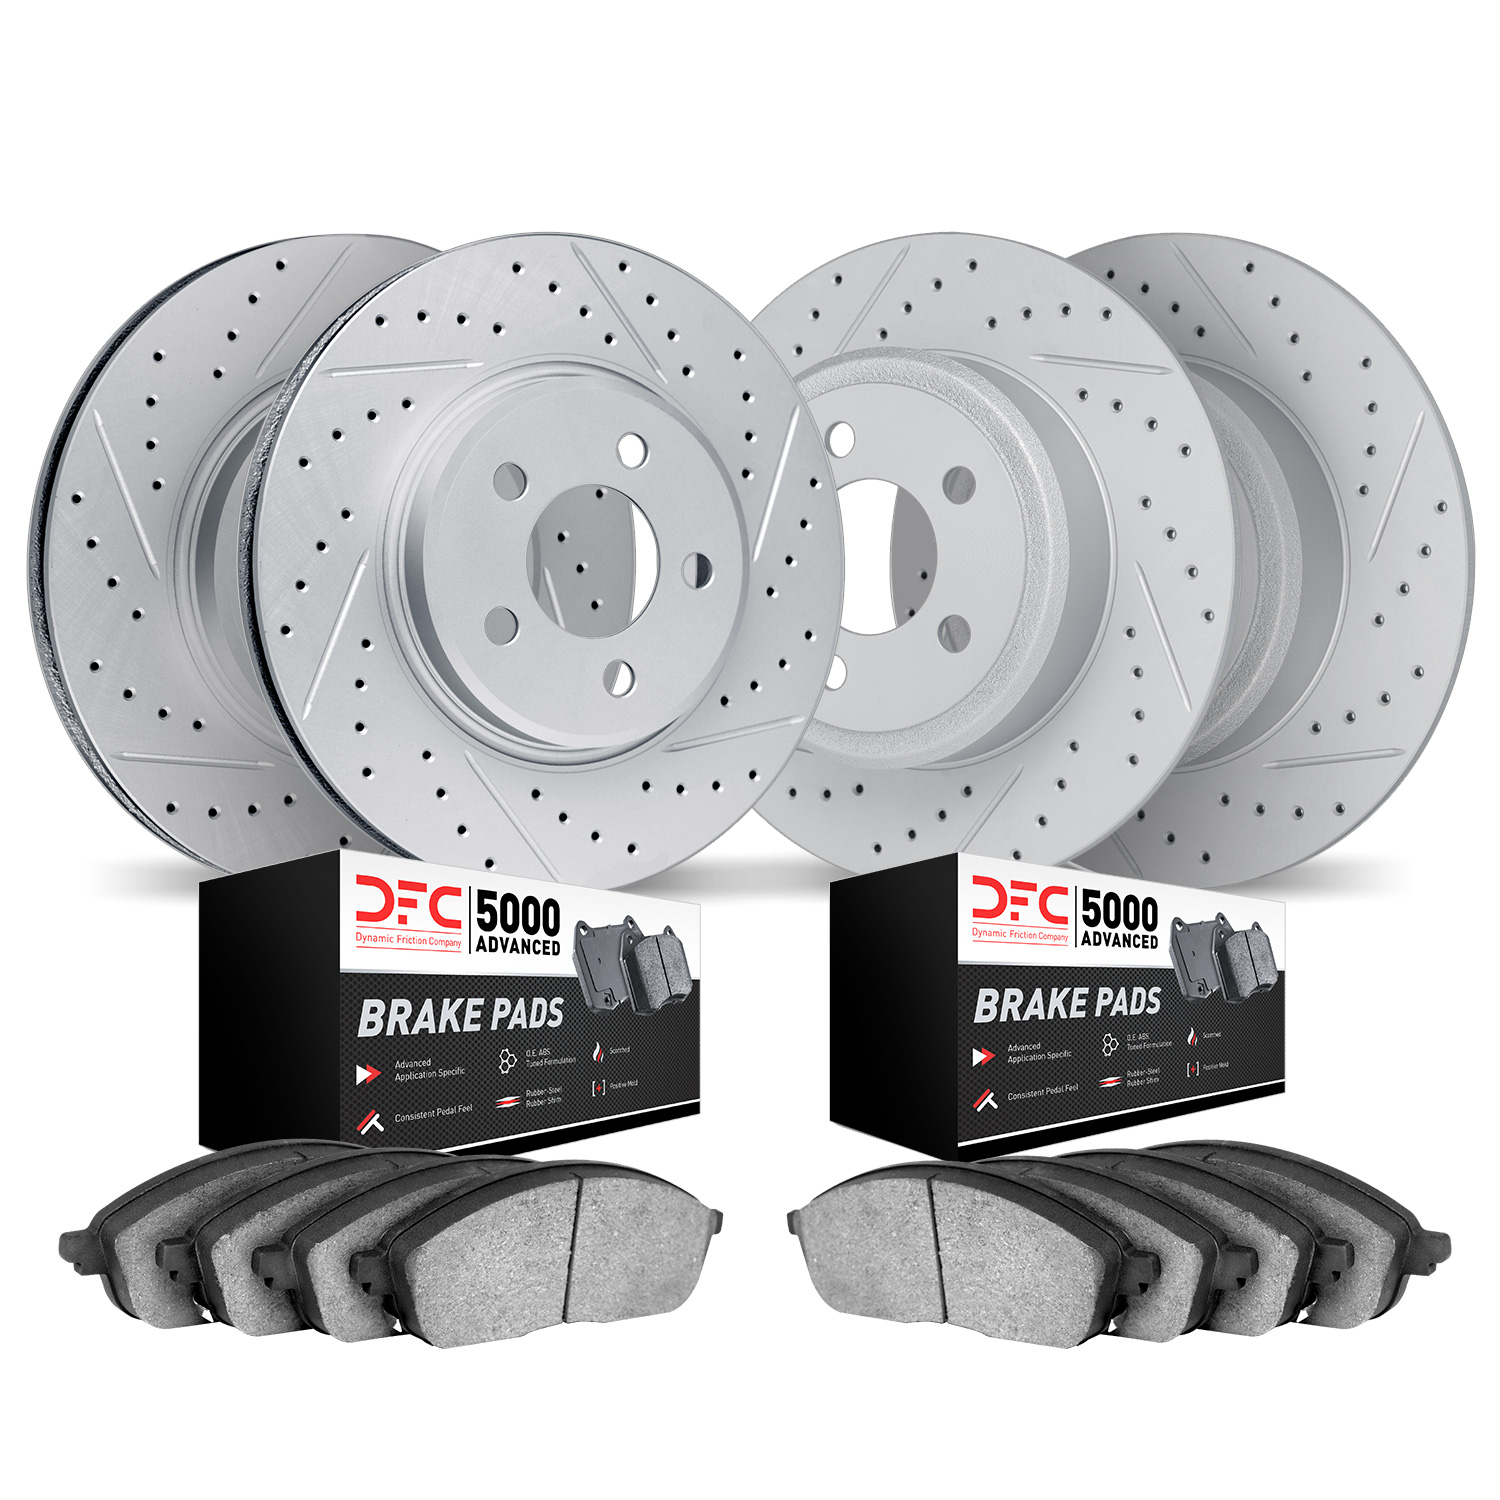 2504-67055 Geoperformance Drilled/Slotted Rotors w/5000 Advanced Brake Pads Kit, 1999-2000 Infiniti/Nissan, Position: Front and